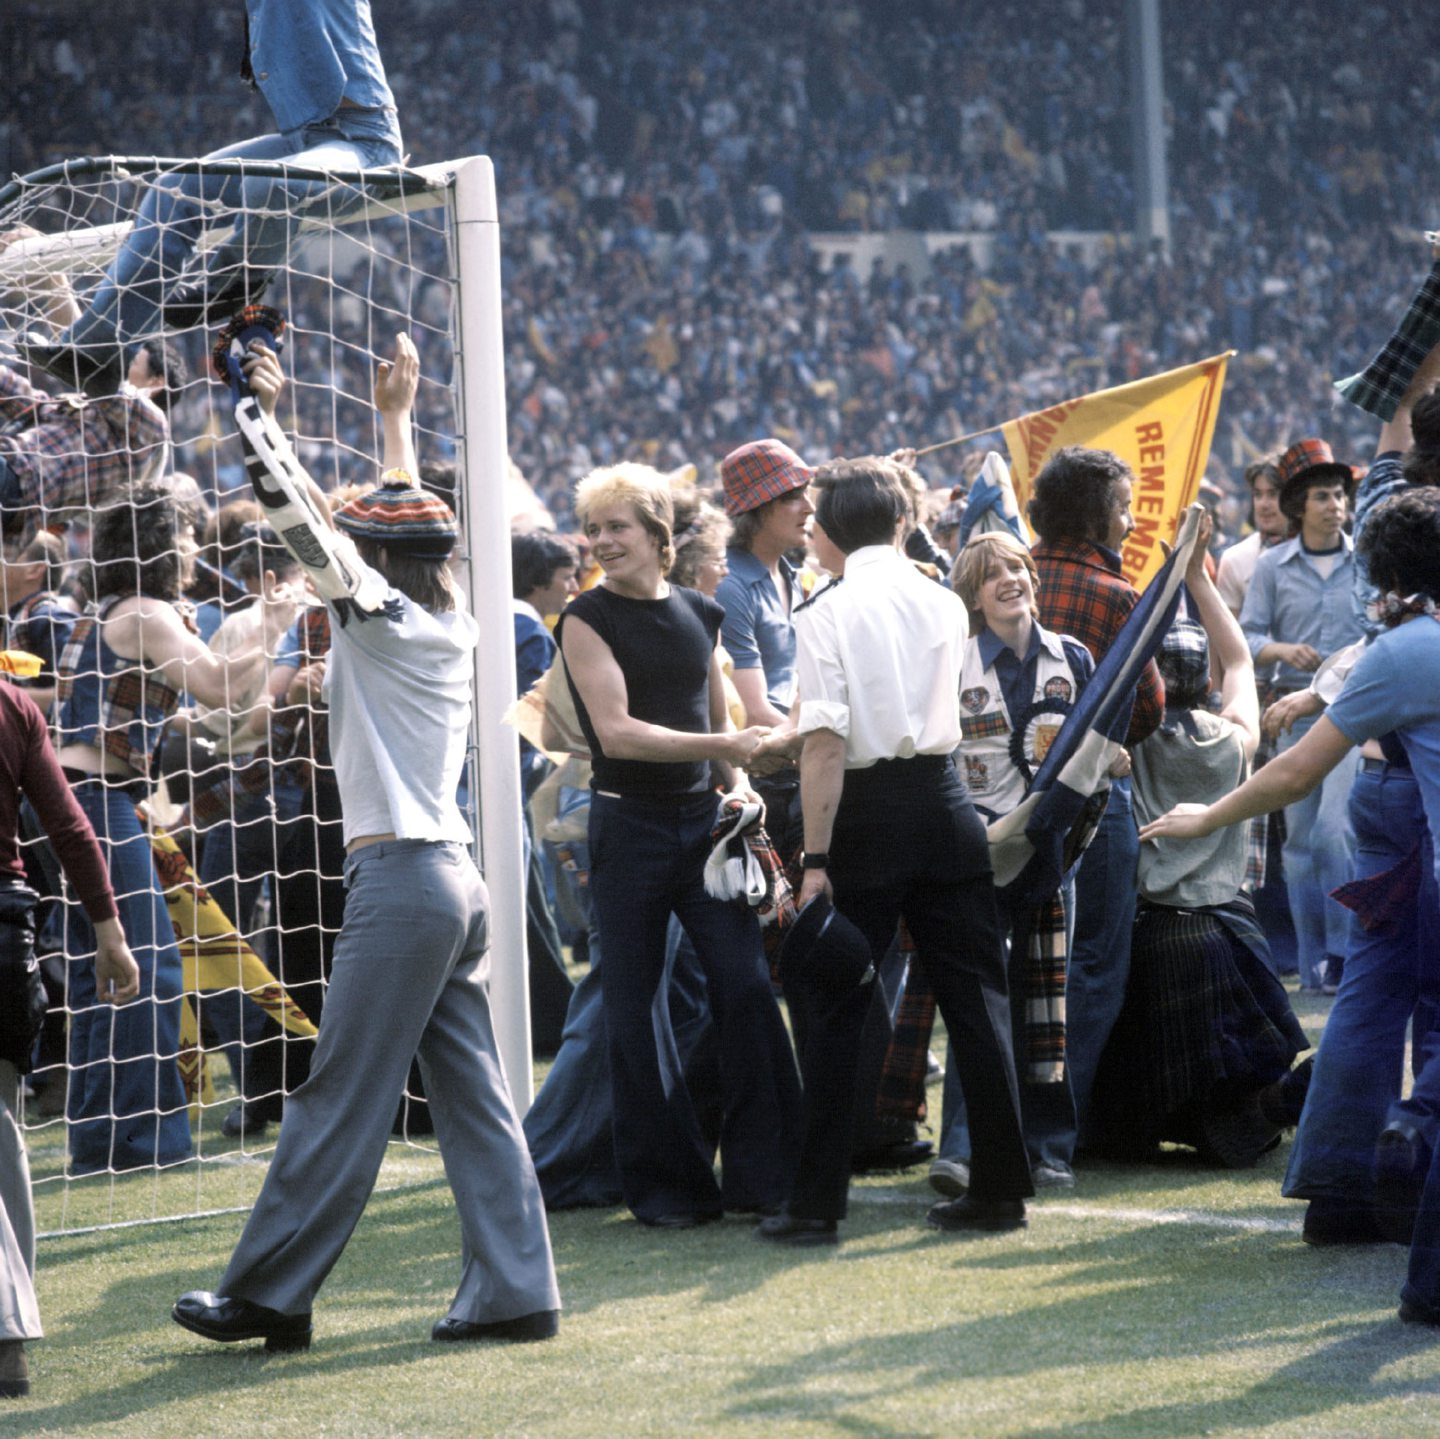 Scotland fans celebrate on the pitch after their team's victory.